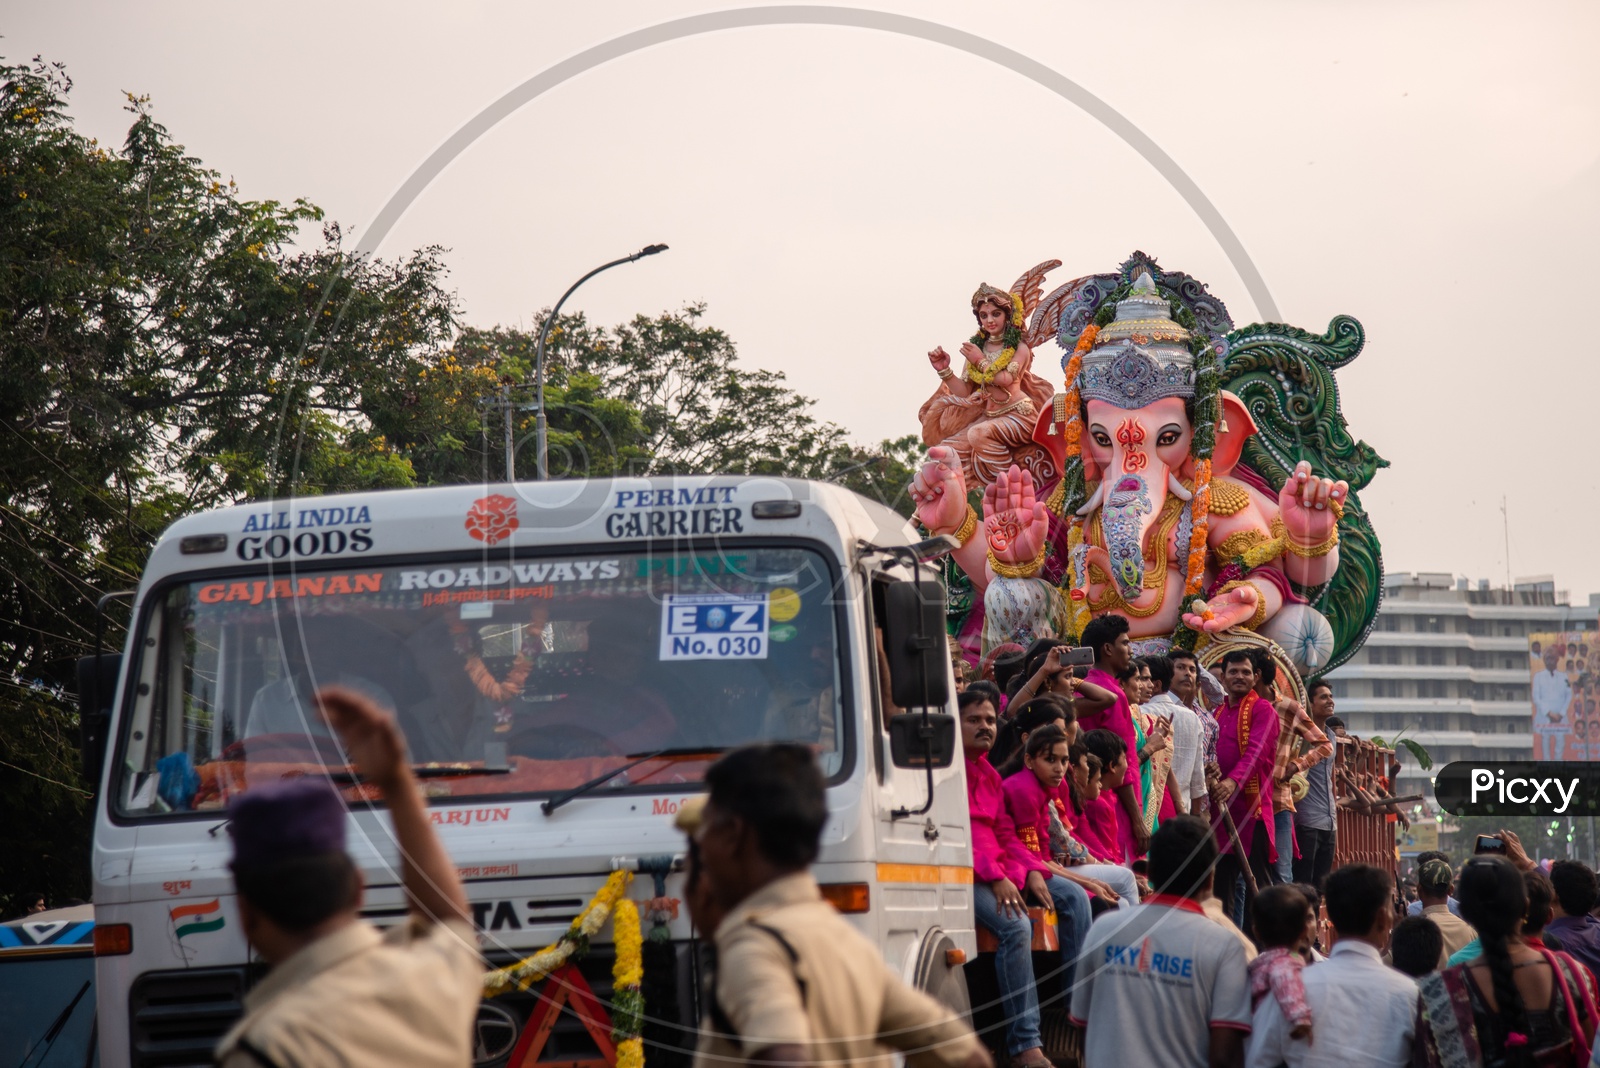 Hyderabad Police signalling a Ganesh Idol Carrying vehicle to march forward